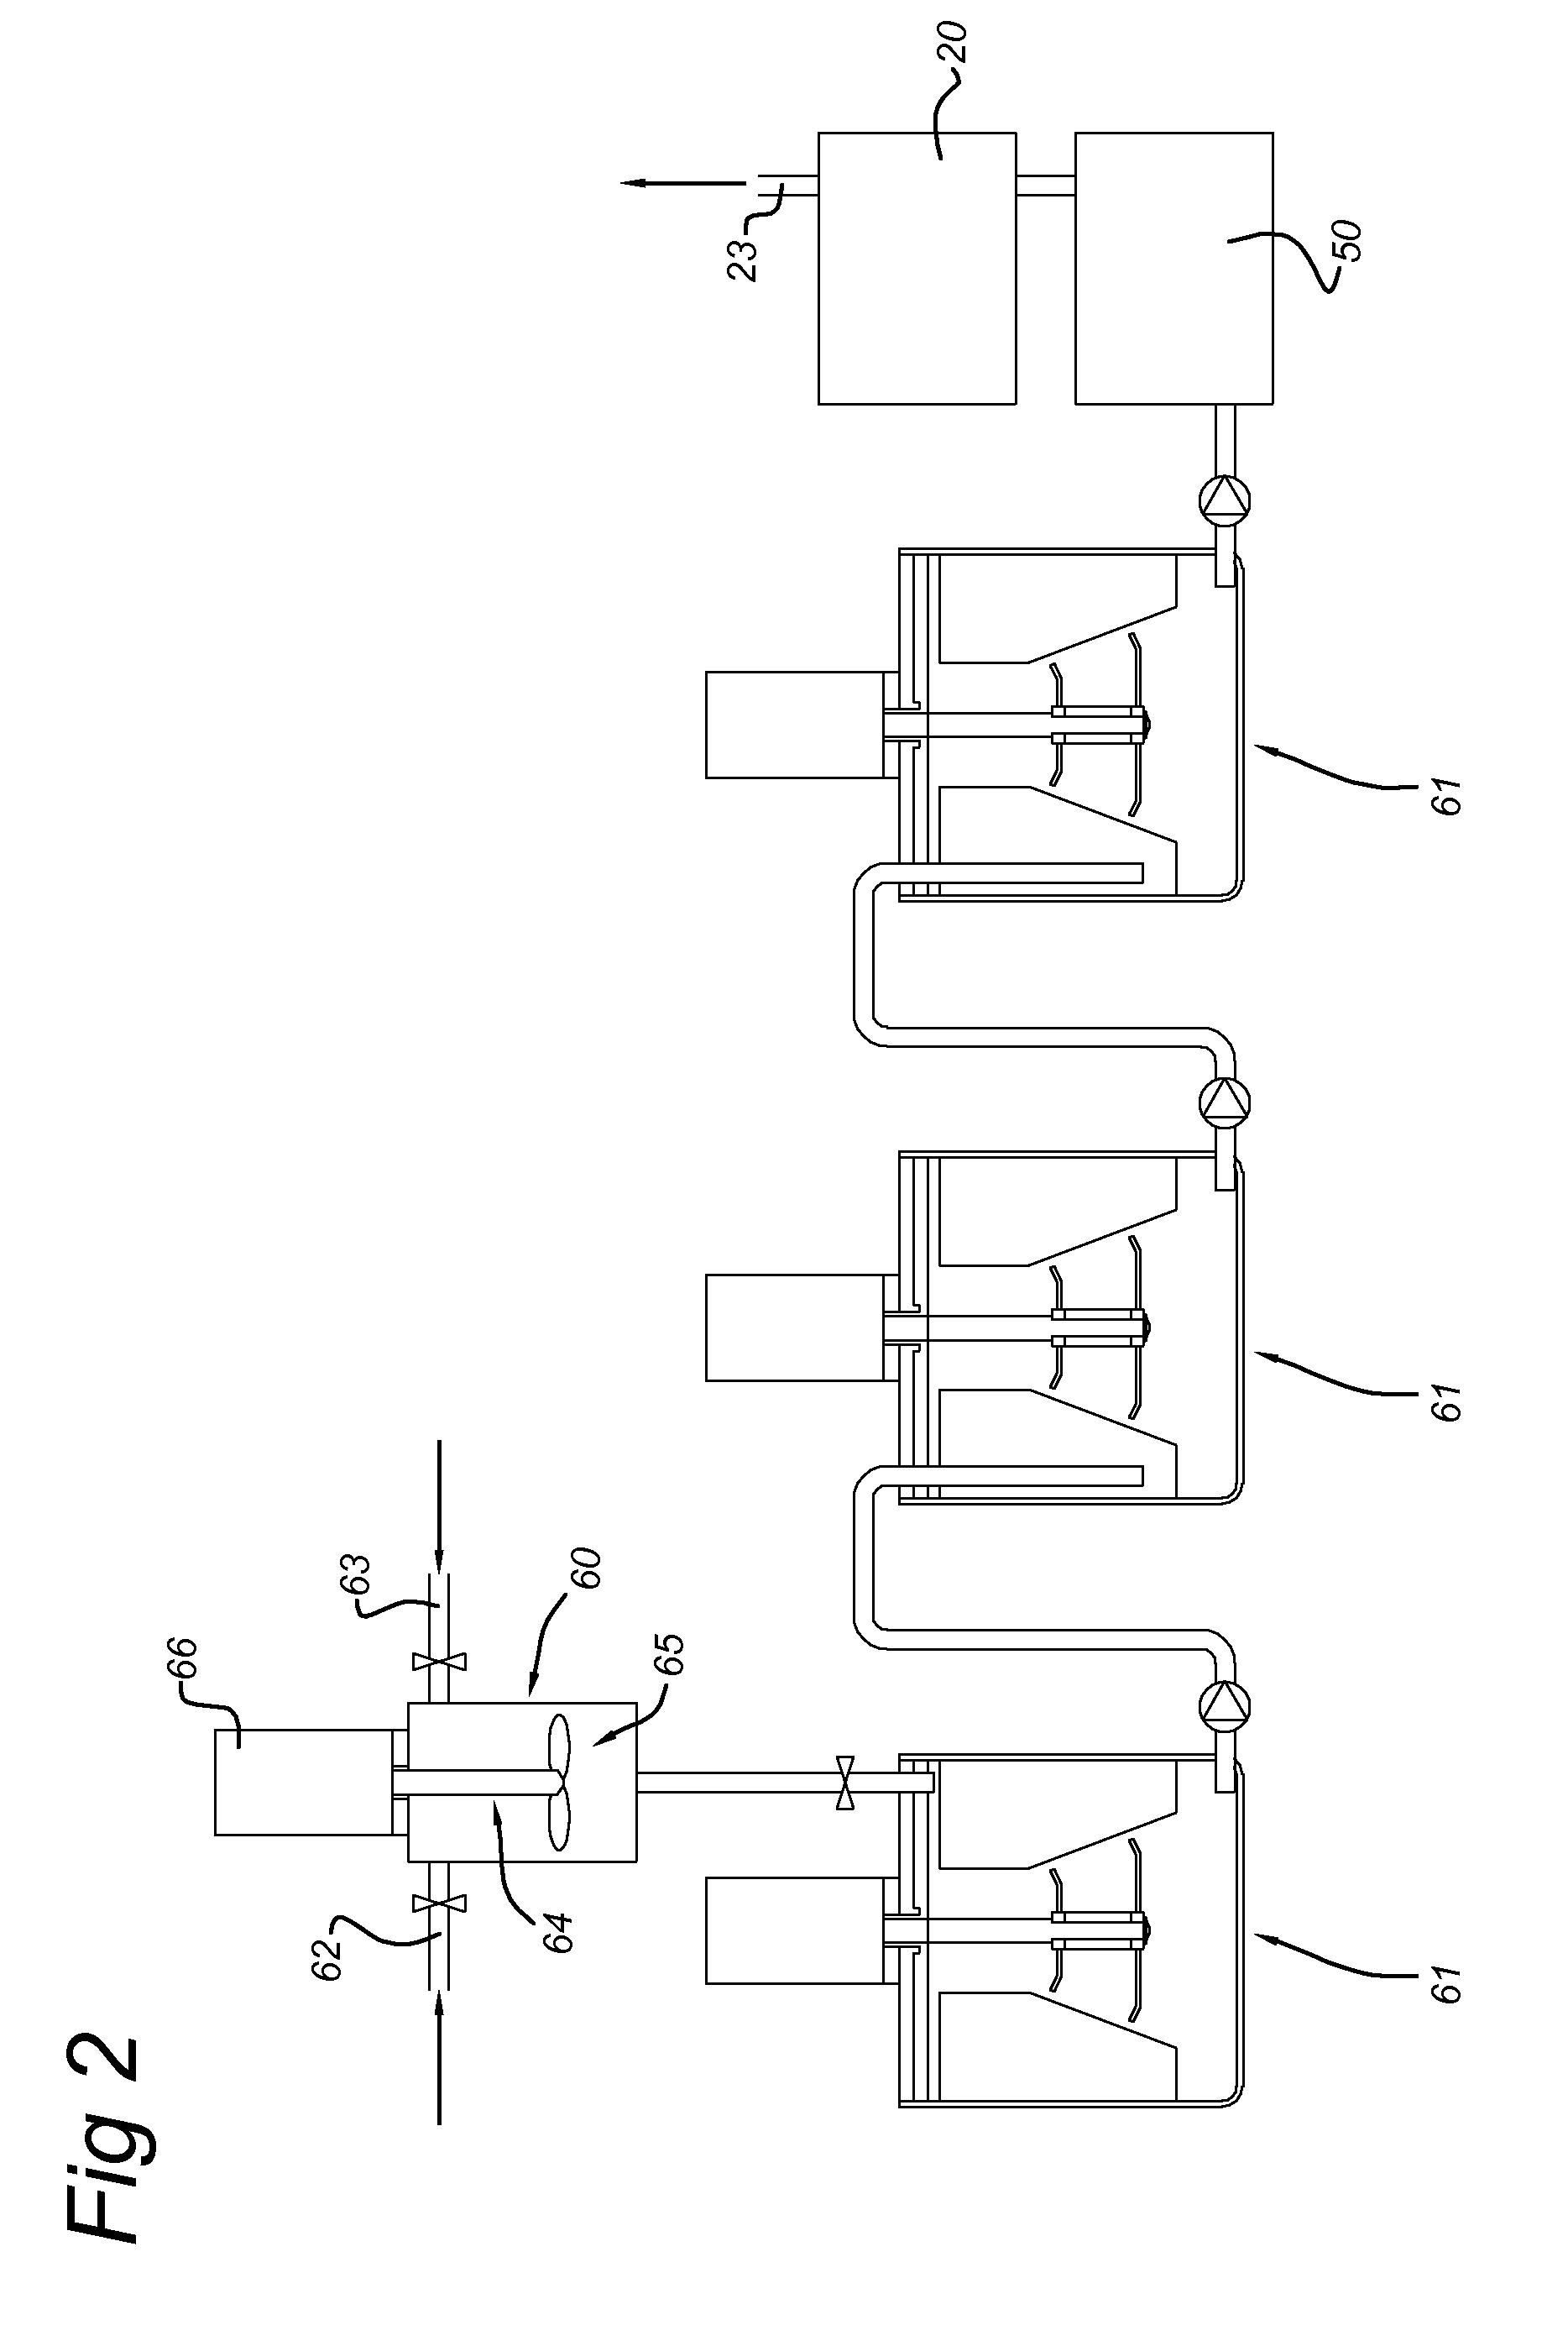 Method of preparing a liquid extract of cereal grain and apparatus suitable for use in such method